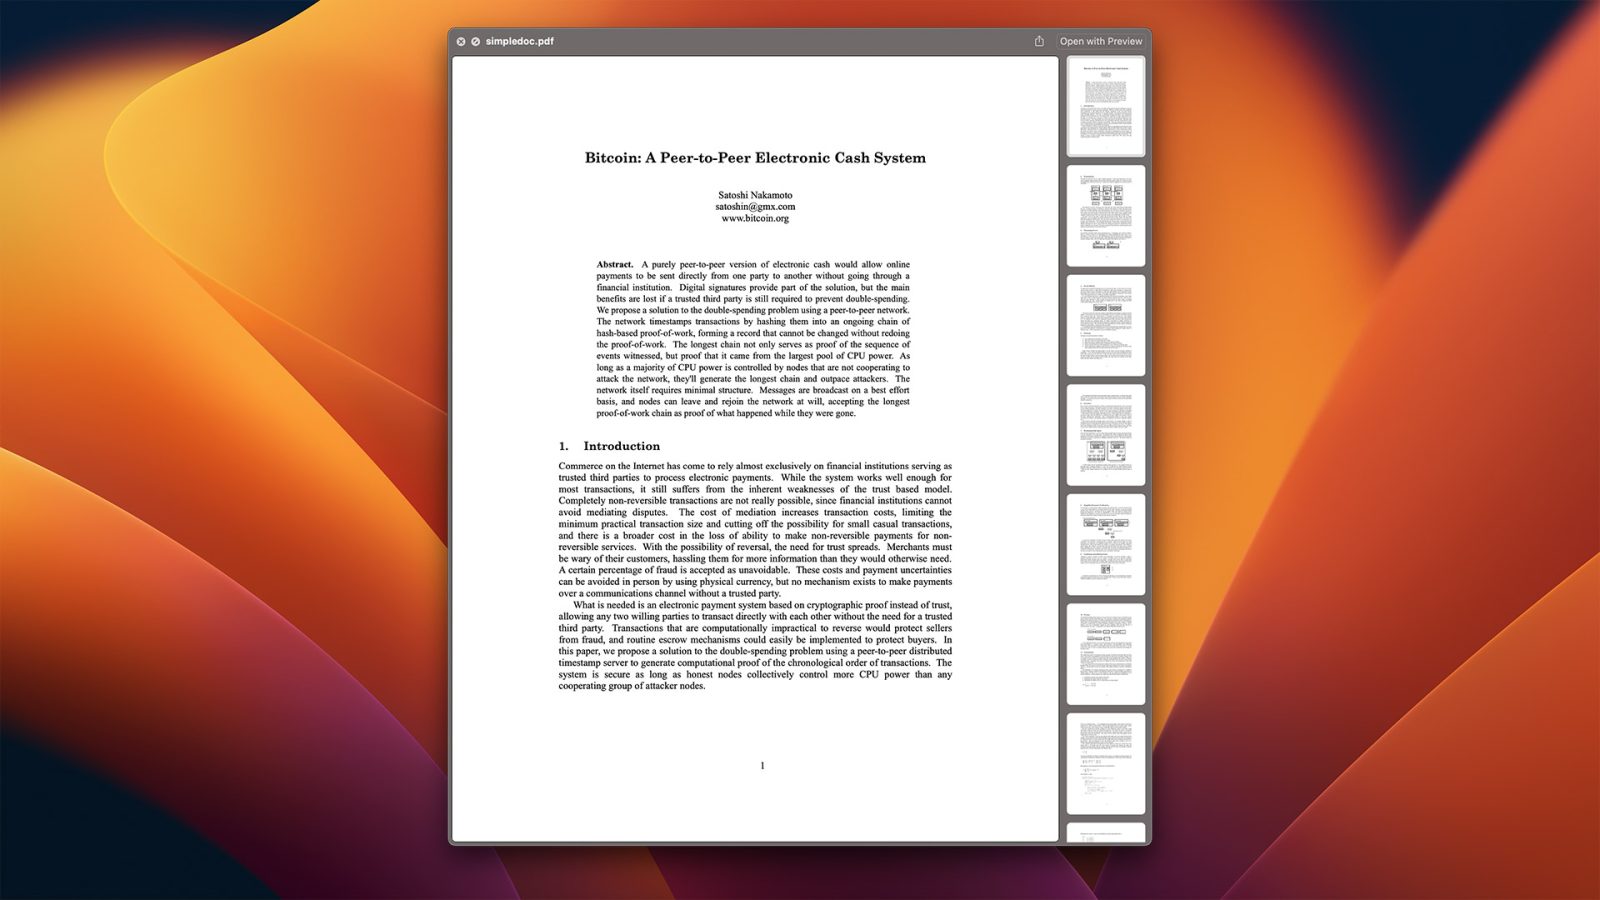 macOS has the Bitcoin whitepaper hidden in its files – but that doesn't mean much